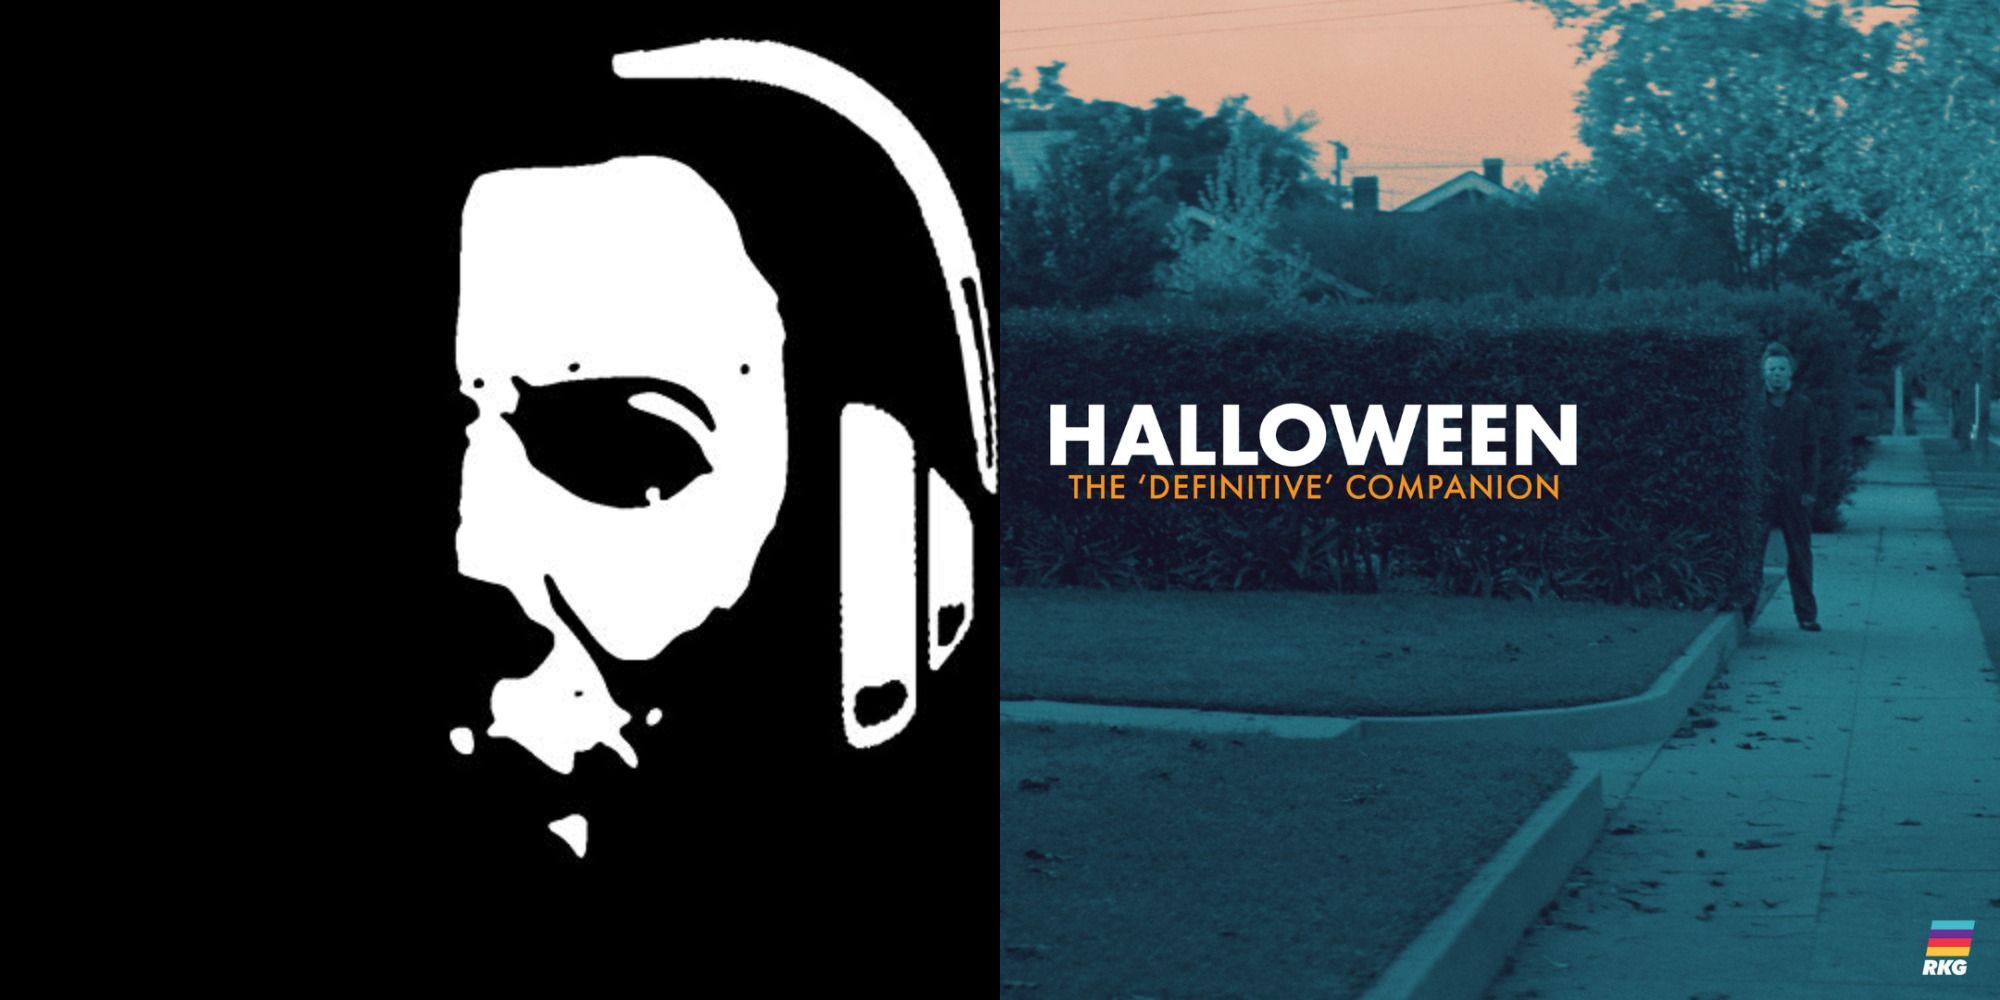 Two side by side images of Halloween themed podcasts.